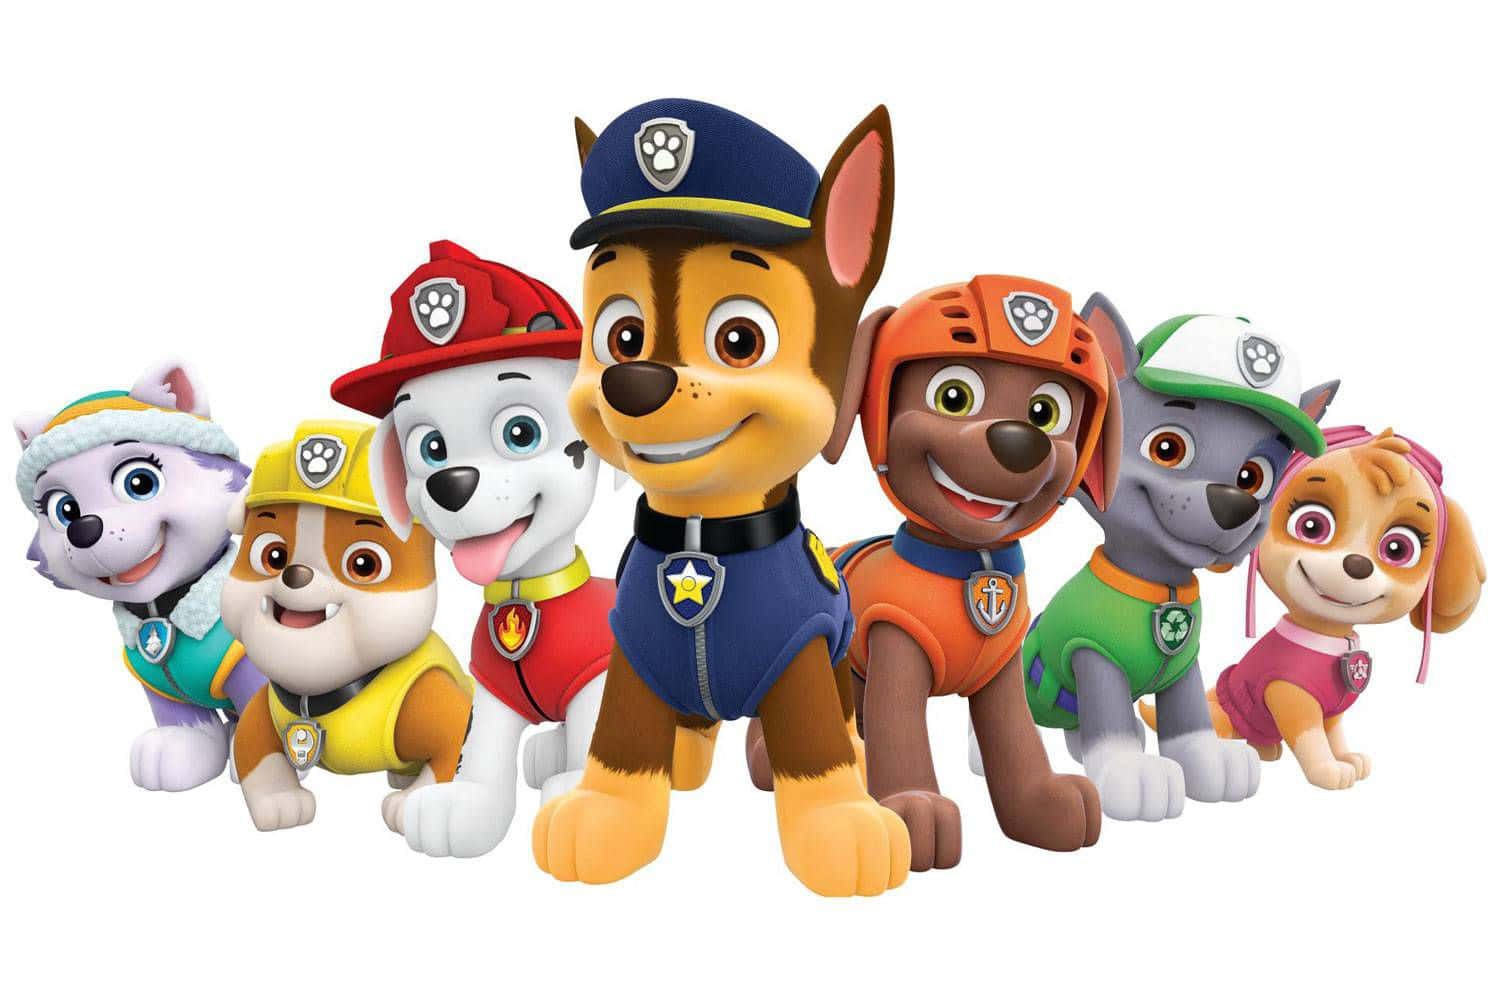 The PAW Patrol is Ready for Adventure!